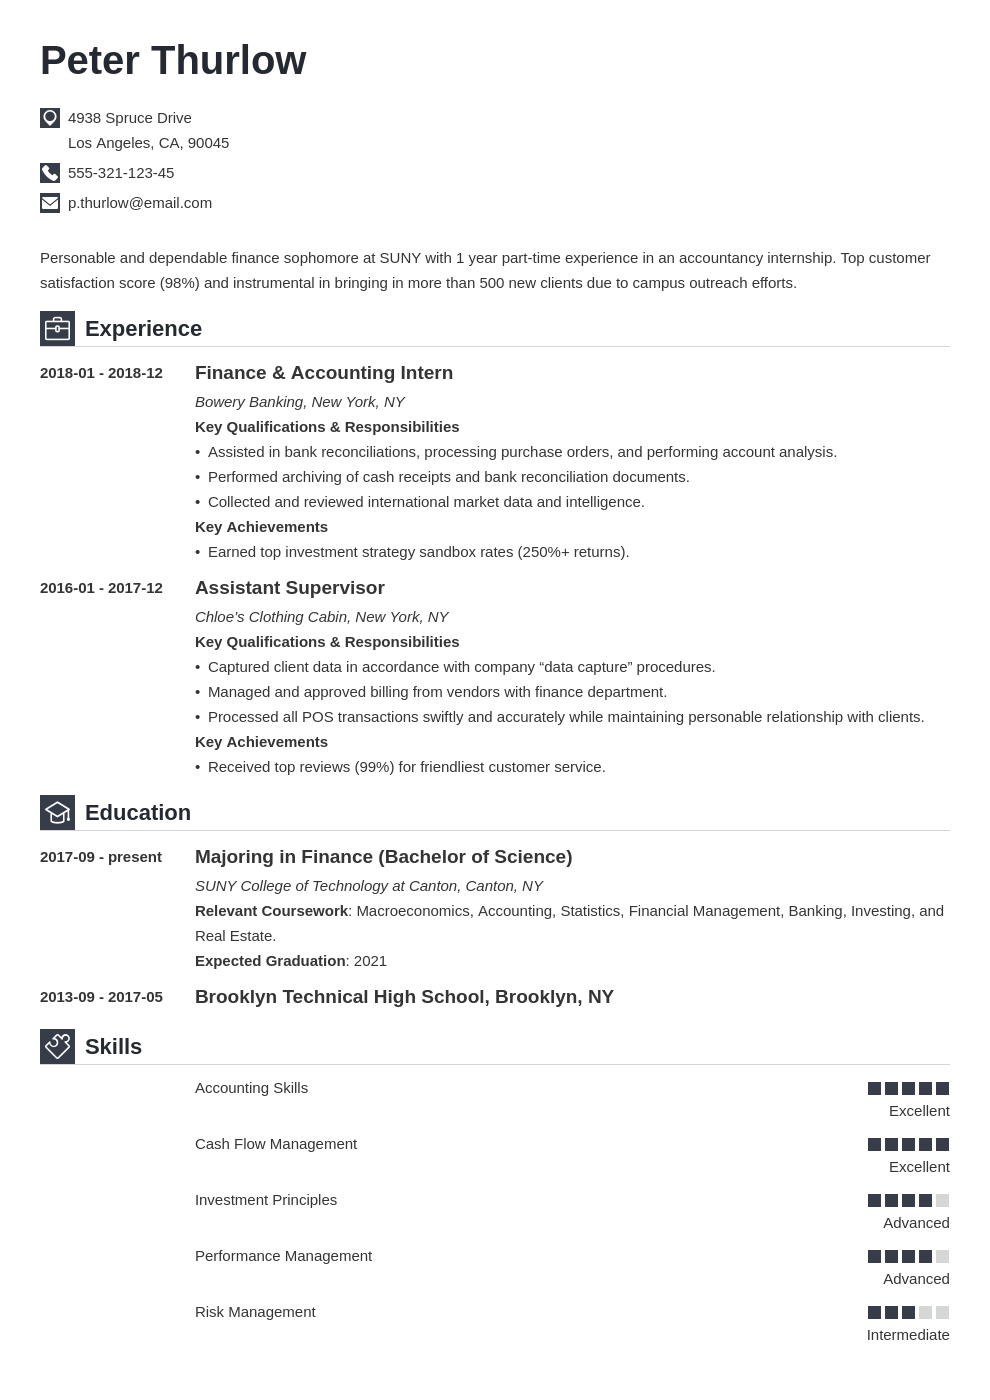 Resume for Internship: Template & Guide (20+ Examples)